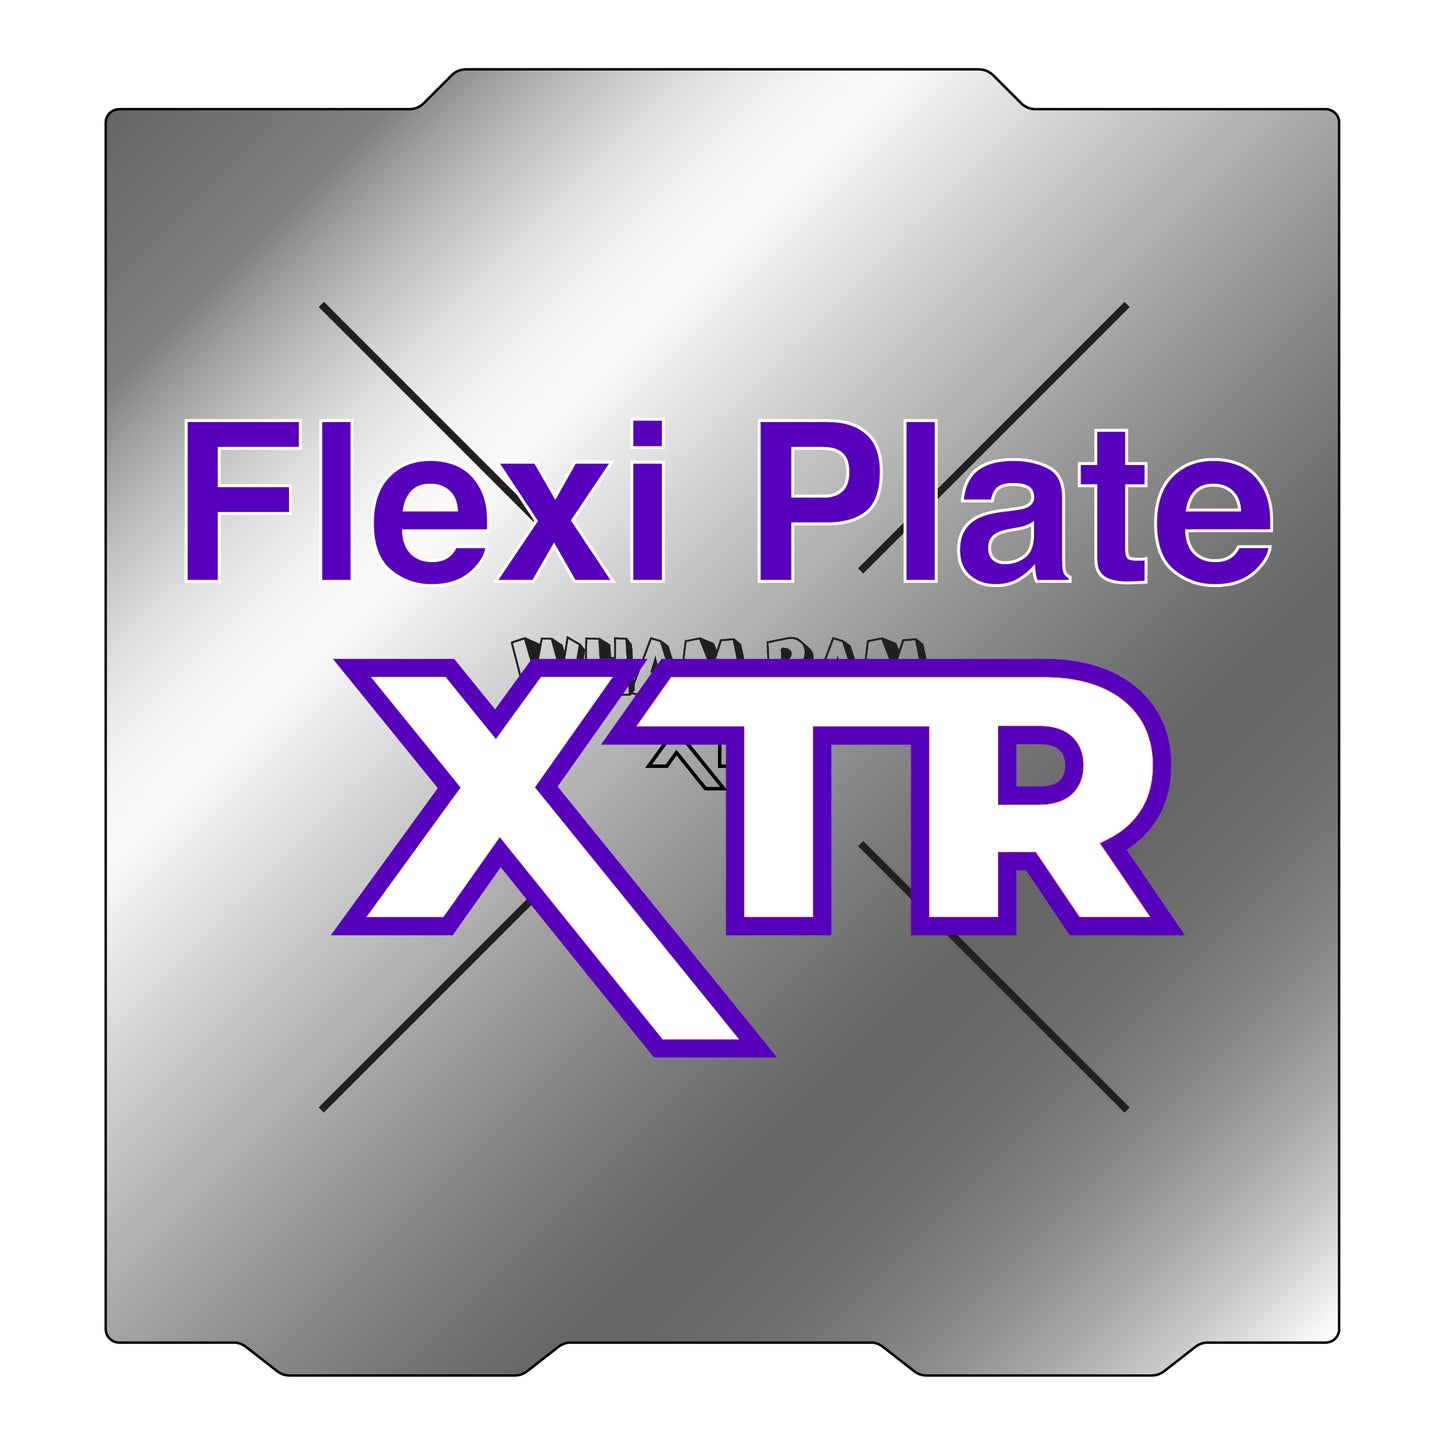 XTR Flexi Plate Only (No Build Surface) - 365 x 365 - Prusa XL